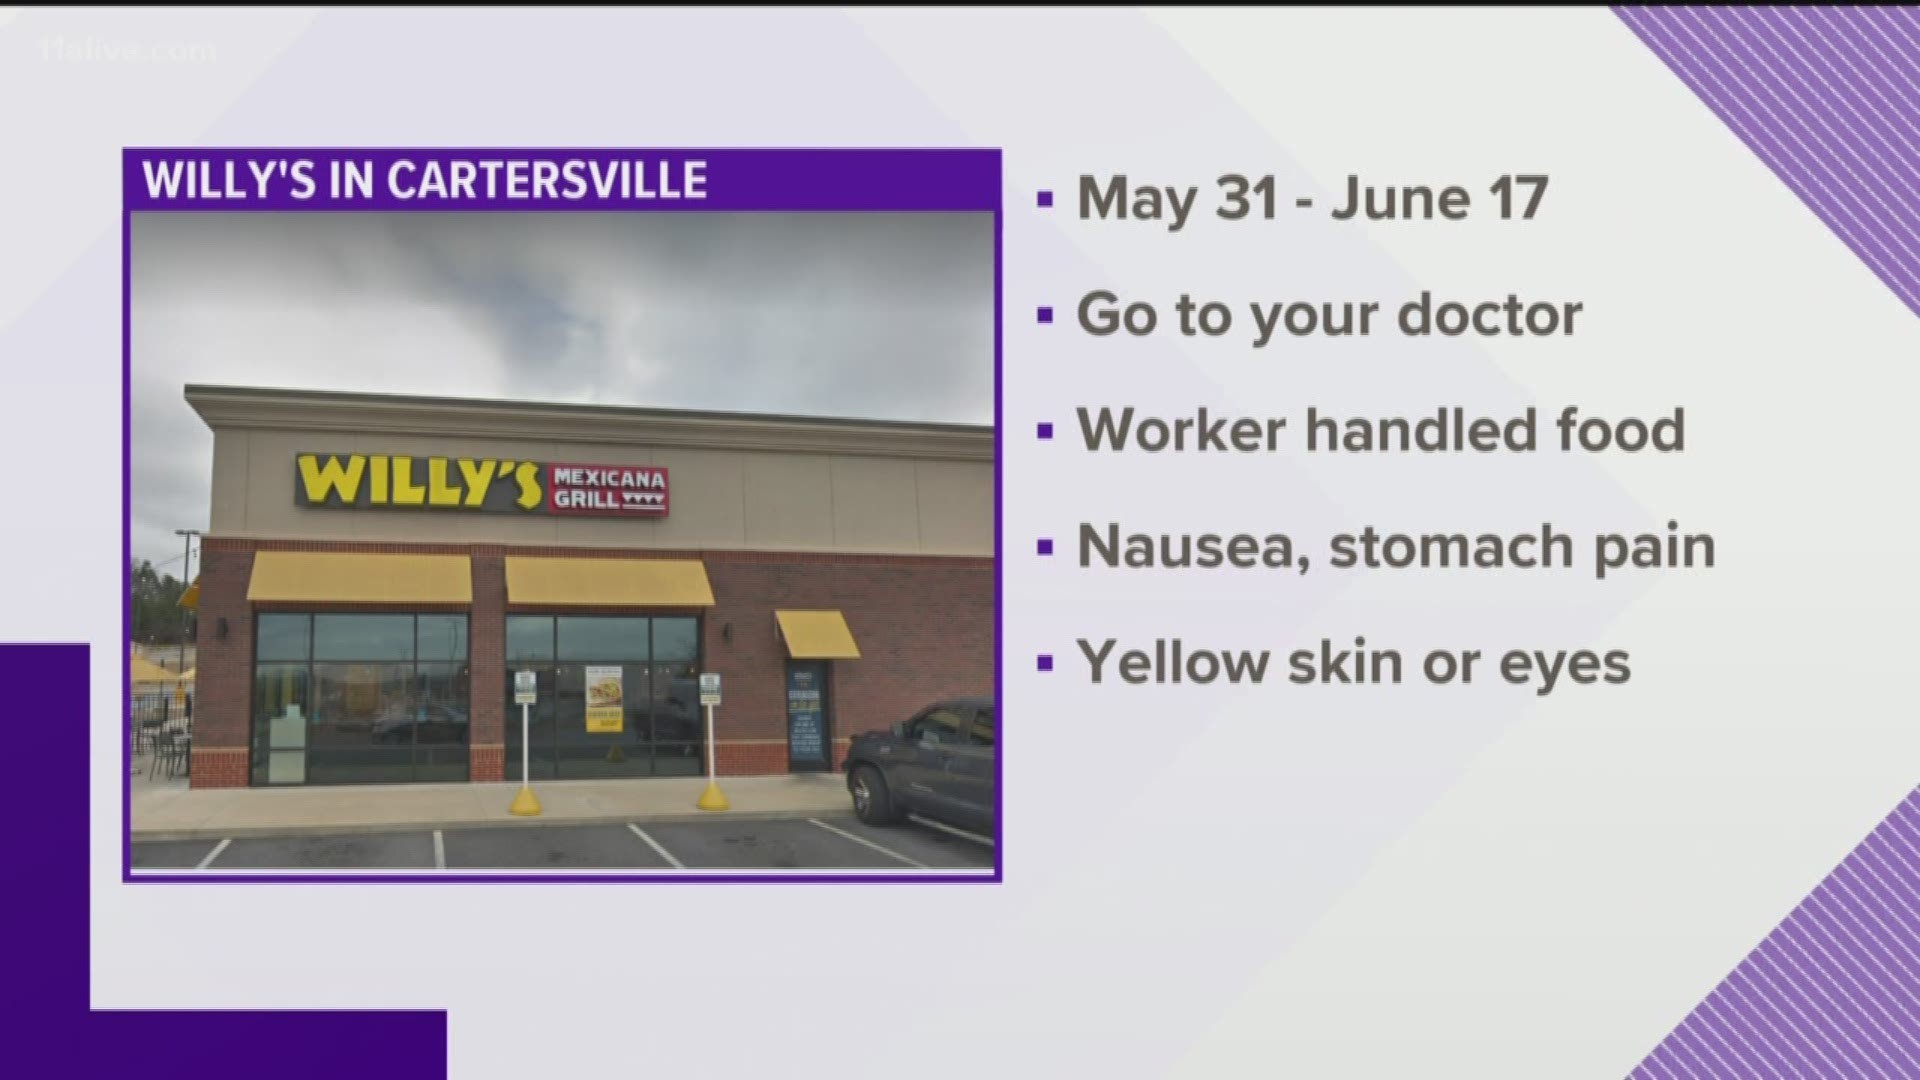 State Health Department officials said a worker at a Cartersville location of Willy's Mexicana Grill has been diagnosed with a case of hepatitis A.